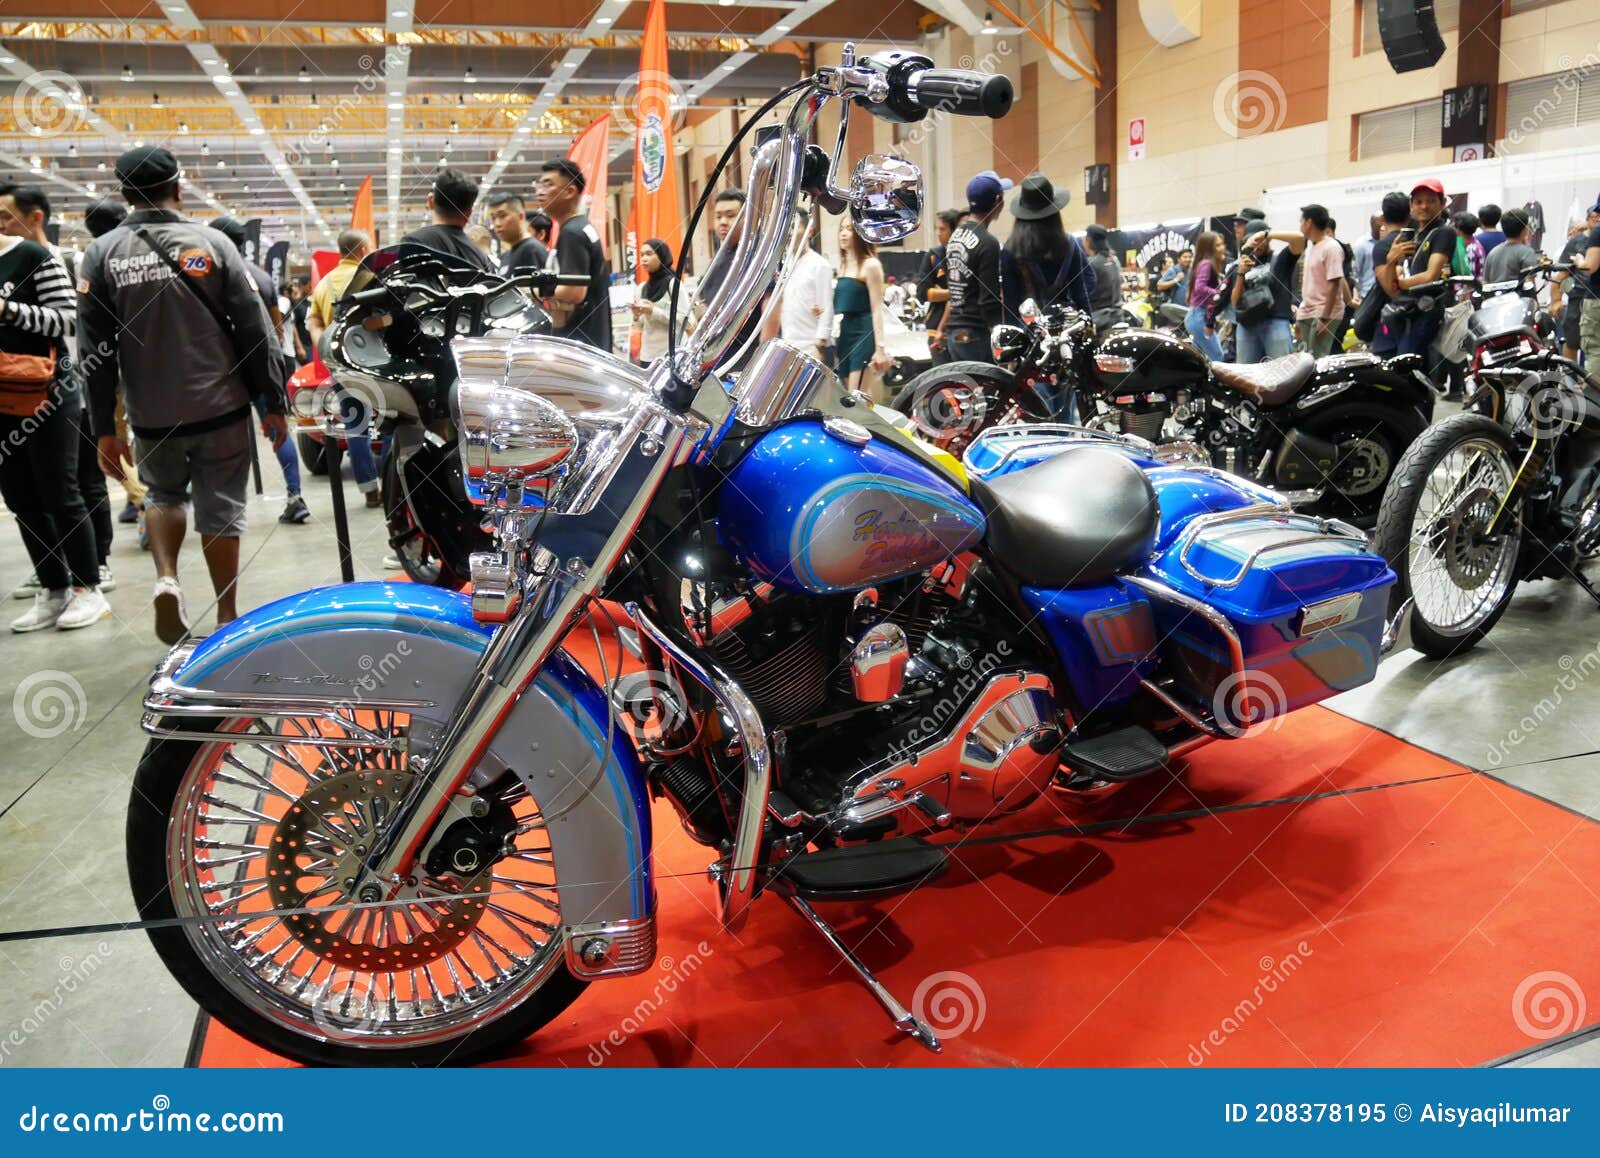 324 Harley Davidson Showroom Photos Free Royalty Free Stock Photos From Dreamstime